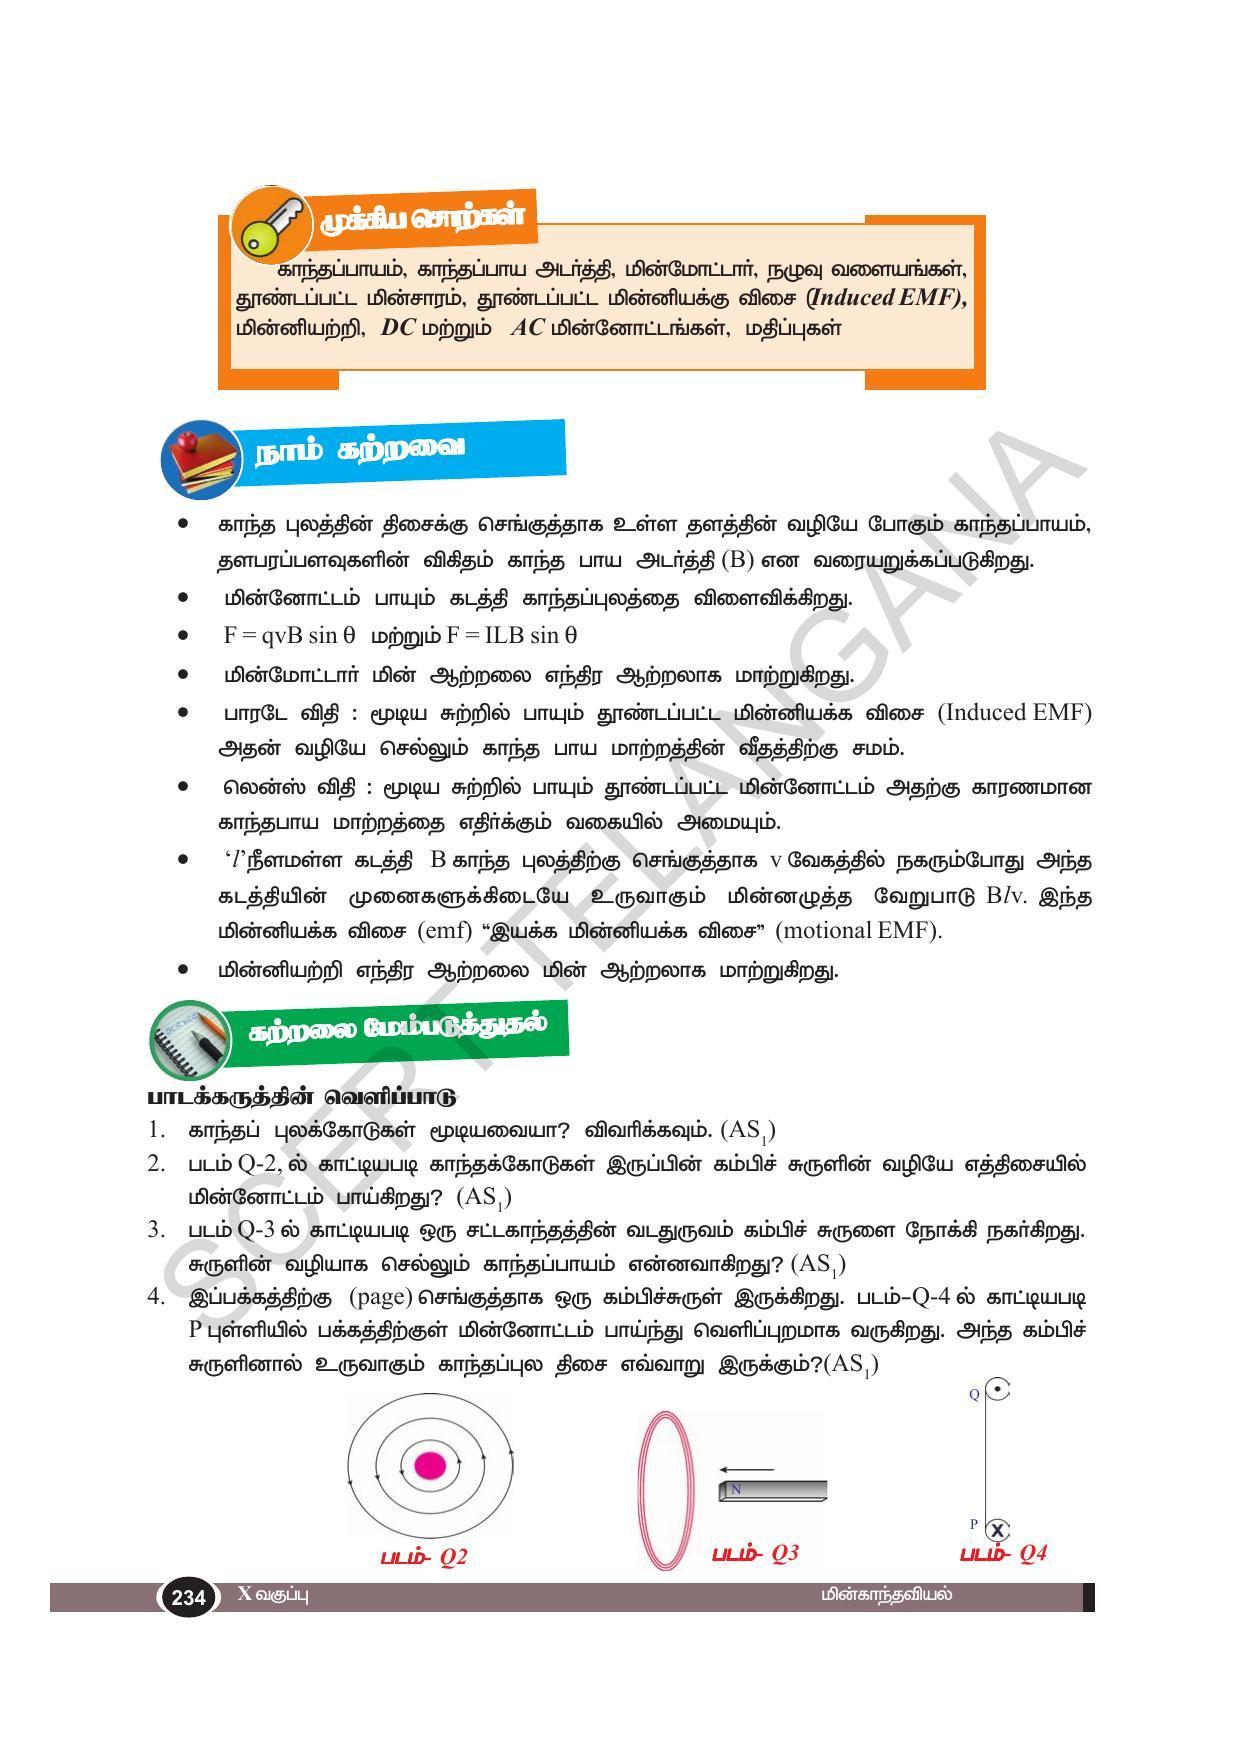 TS SCERT Class 10 Physical Science(Tamil Medium) Text Book - Page 246